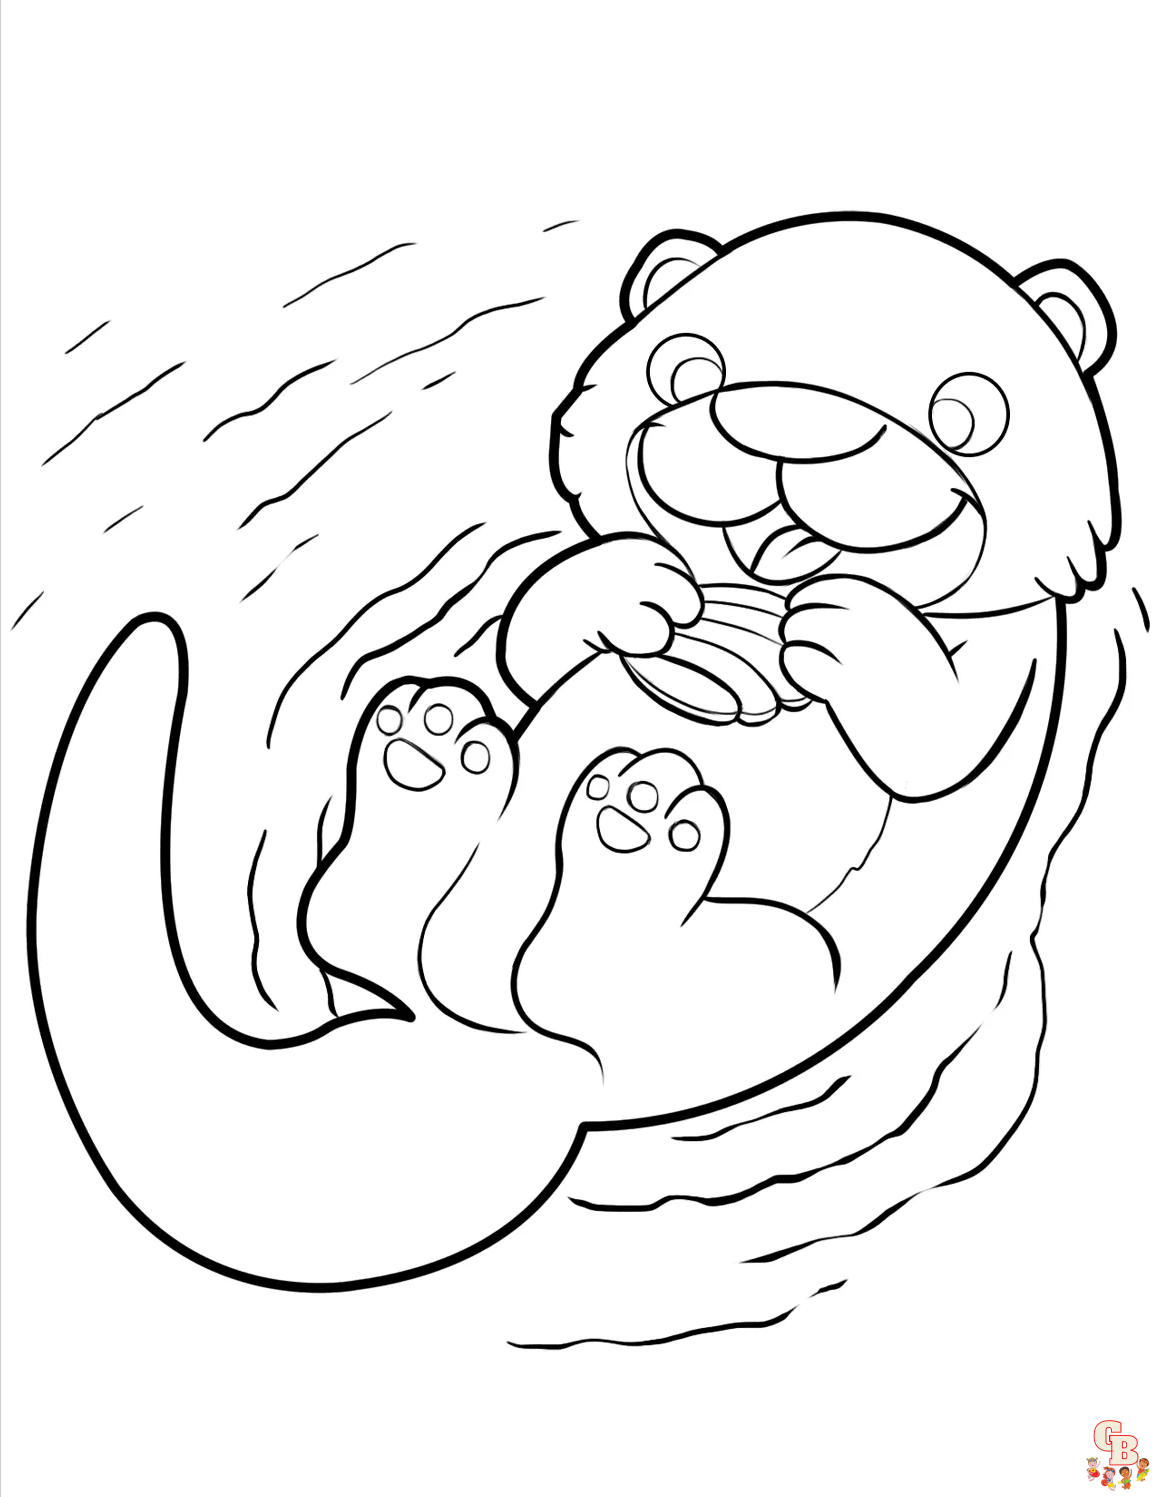 Otter Coloring Pages 1